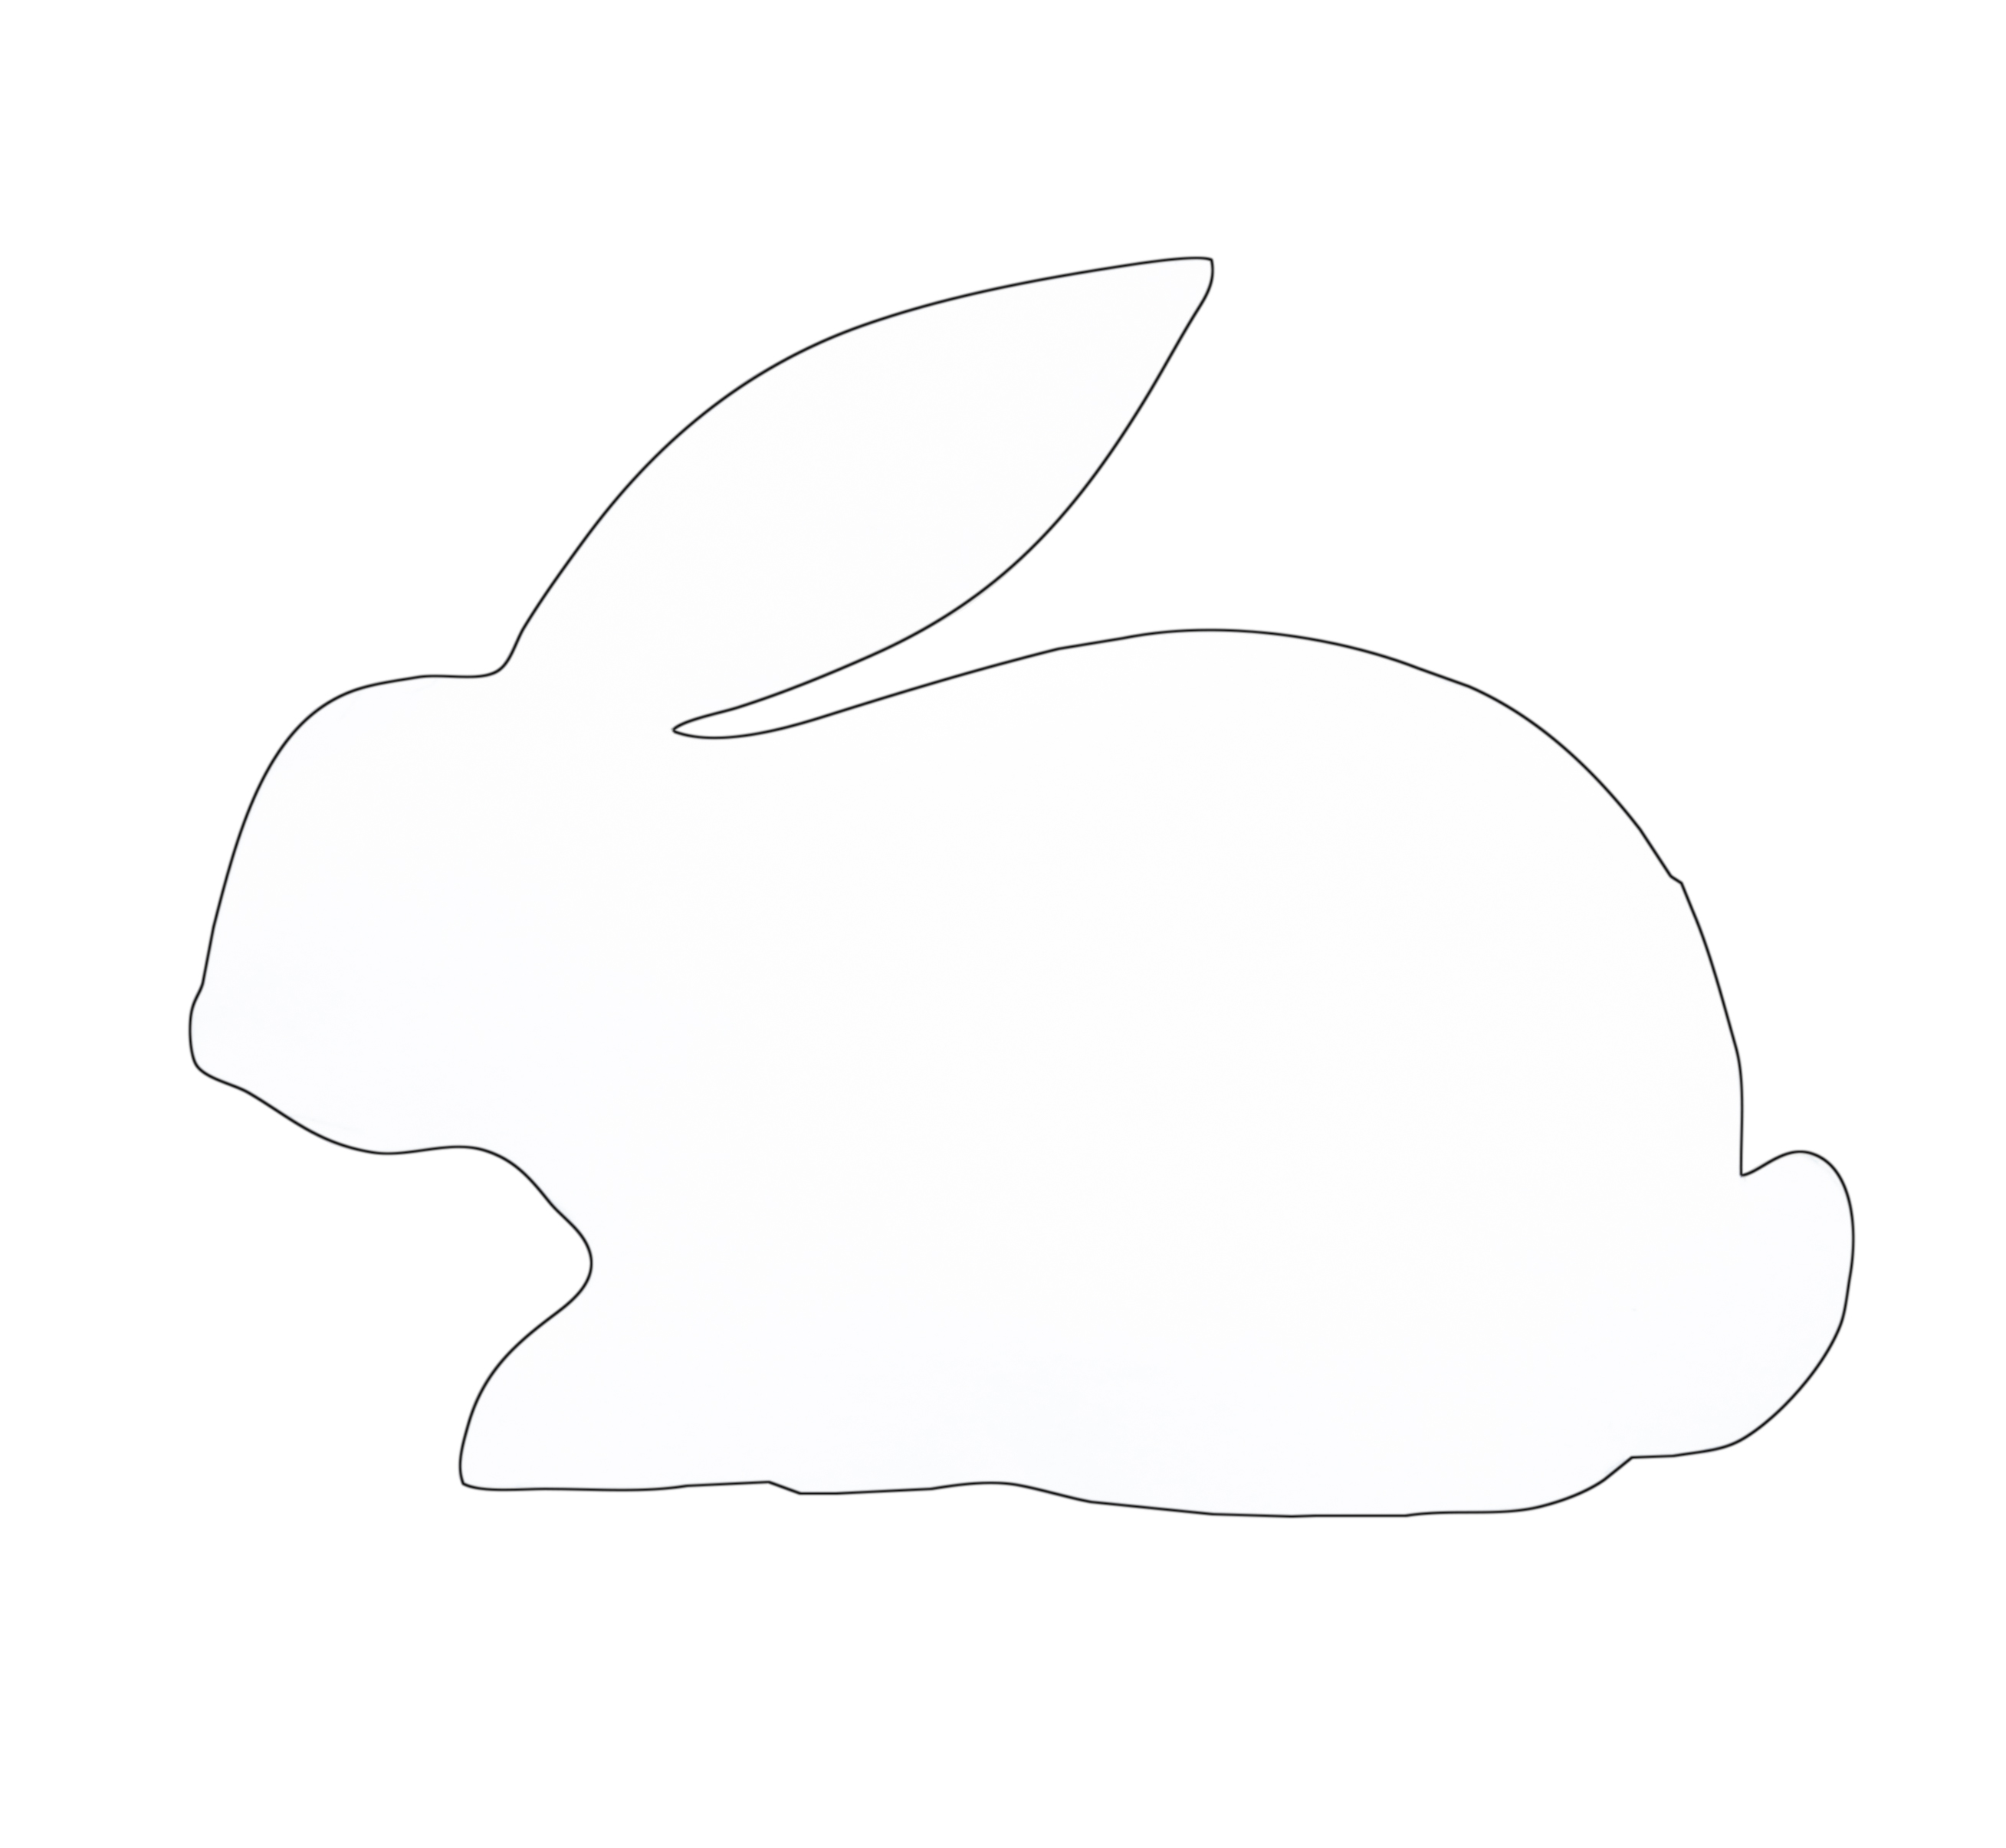 bunny-outline-printable-rabbit-template-for-craft-silhouette-jpg